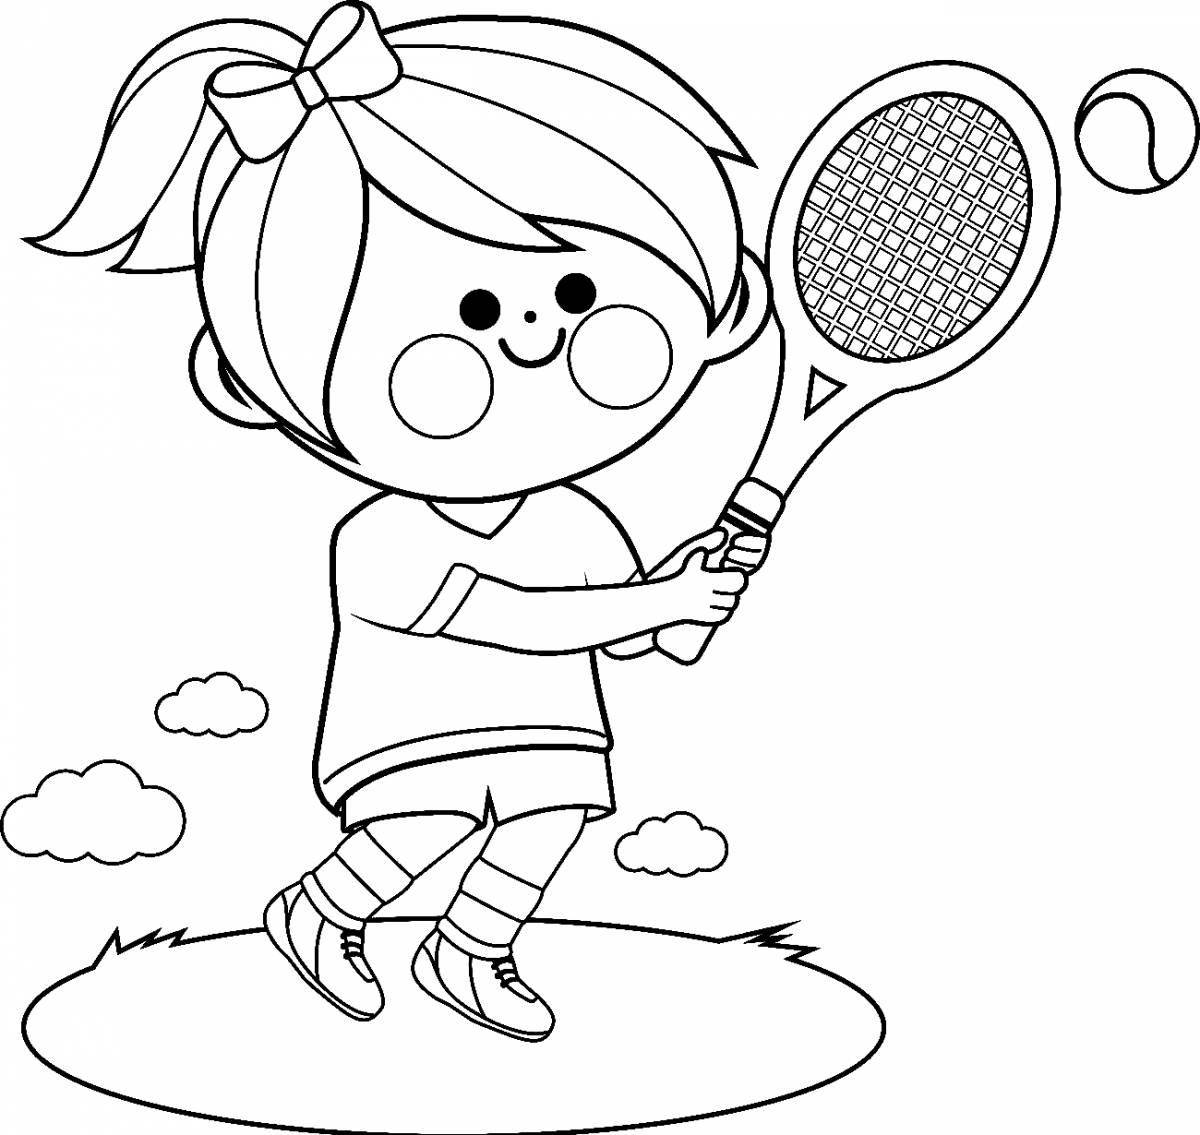 Colorful tennis coloring book for kids